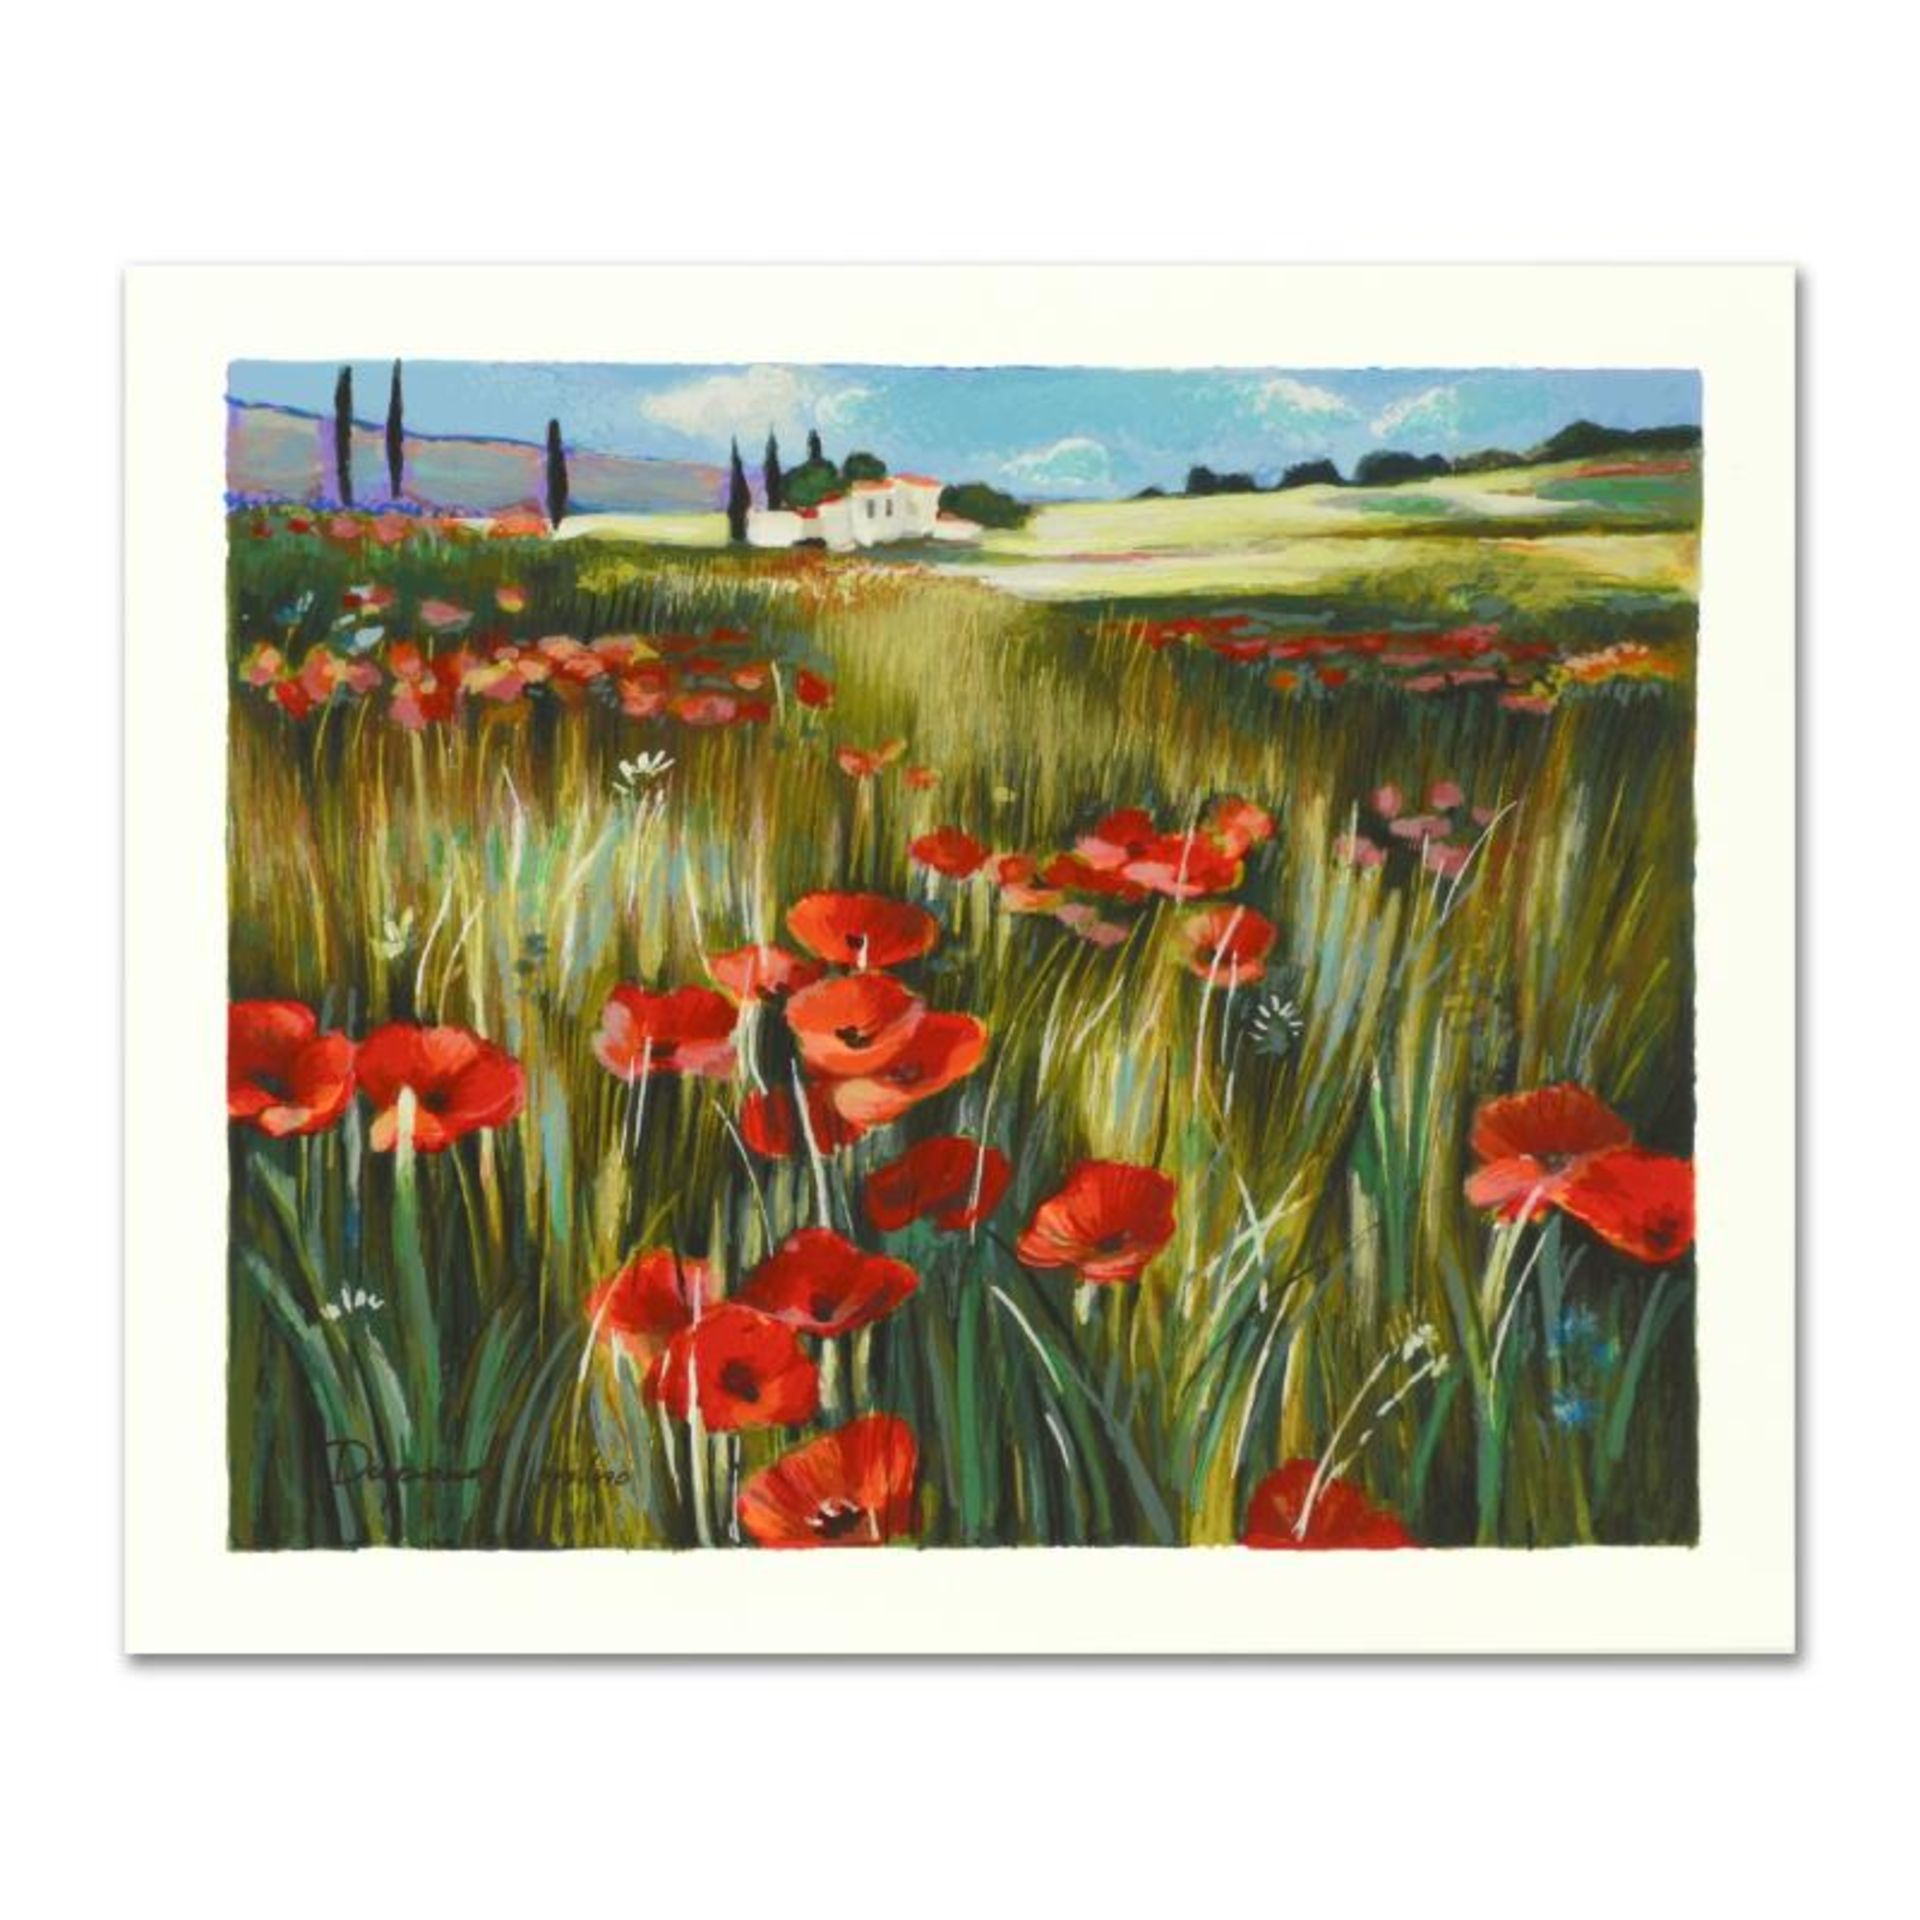 Yuri Dupond, "Red Meadow" Limited Edition Serigraph, Numbered and Hand Signed wi